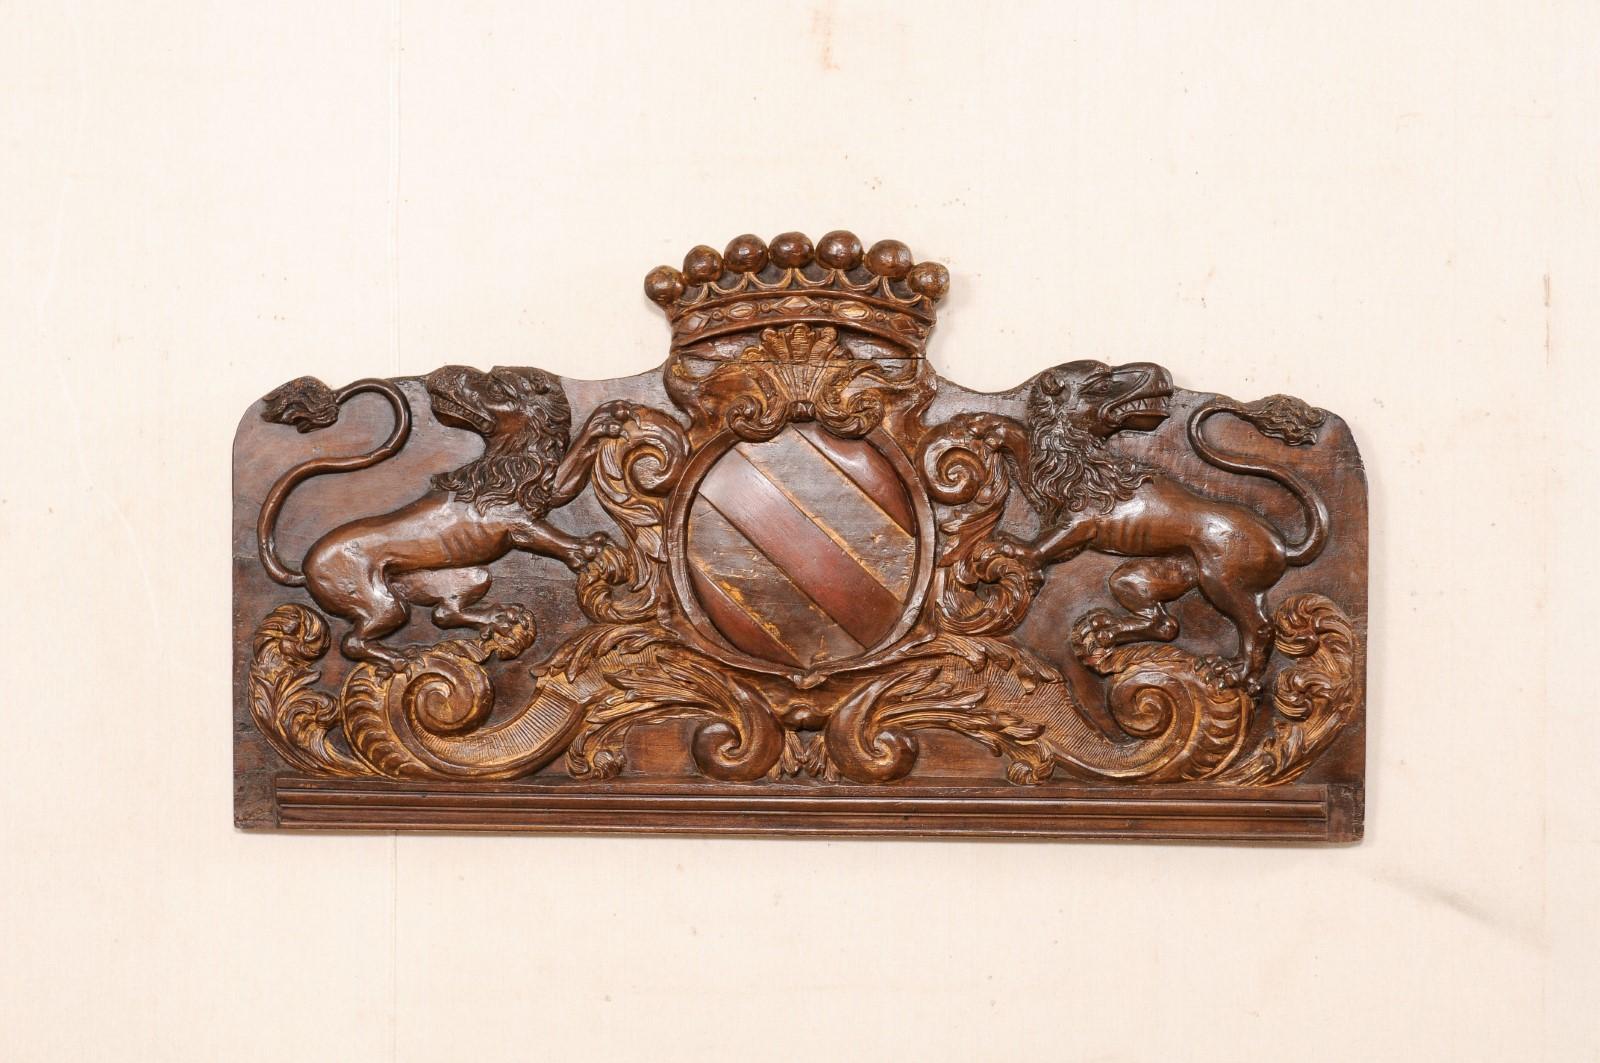 A French carved-wood panel from the 18th century. This antique wall decoration from France has a primarily rectangular shape, with raised carvings depicting a raised crown crest at top center, above a shielded crest at middle, flanked within a pair